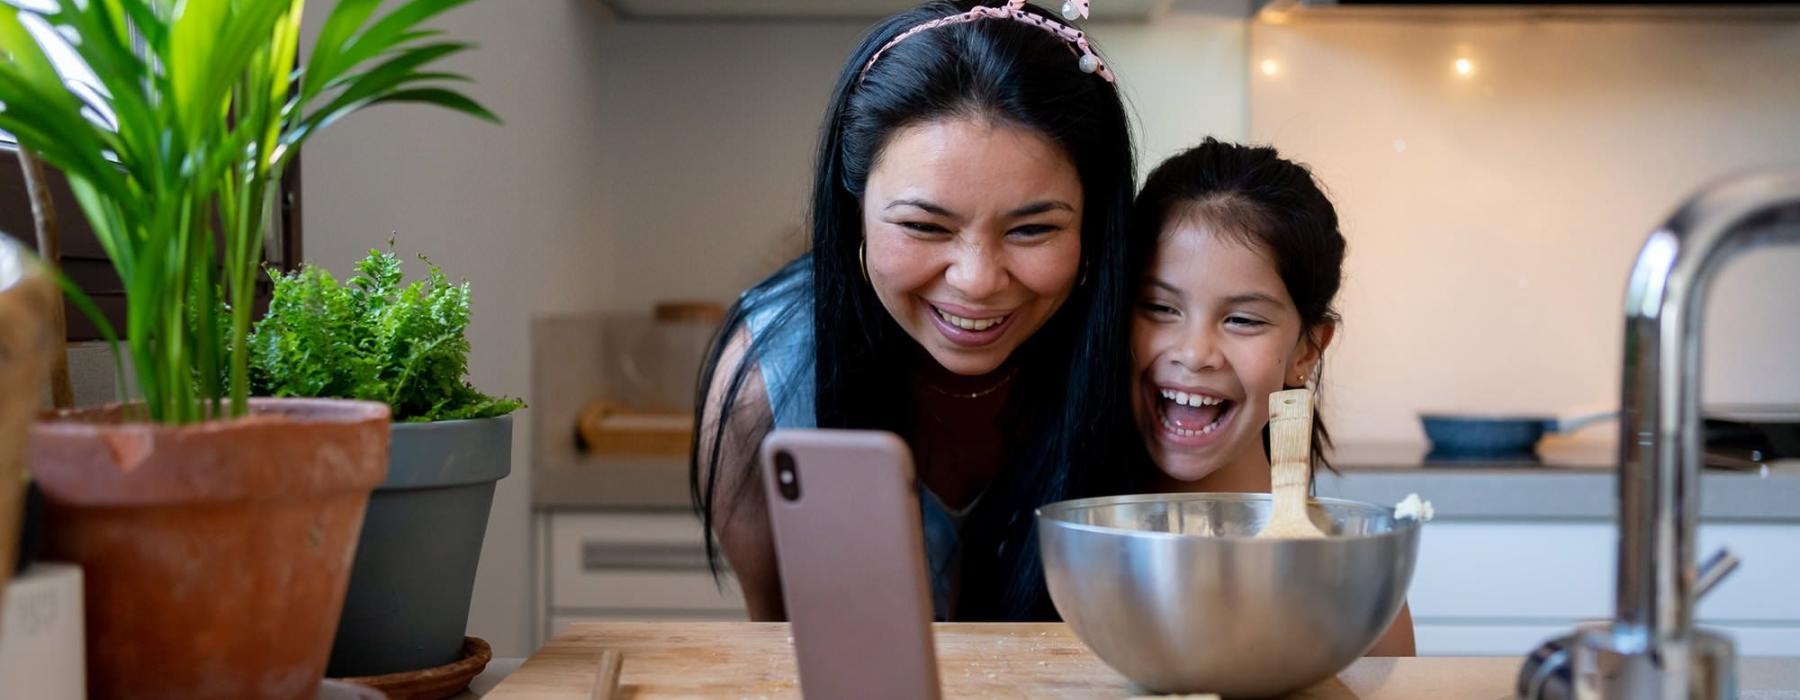 mother and young daughter smile at their phone as they cook in the kitchen